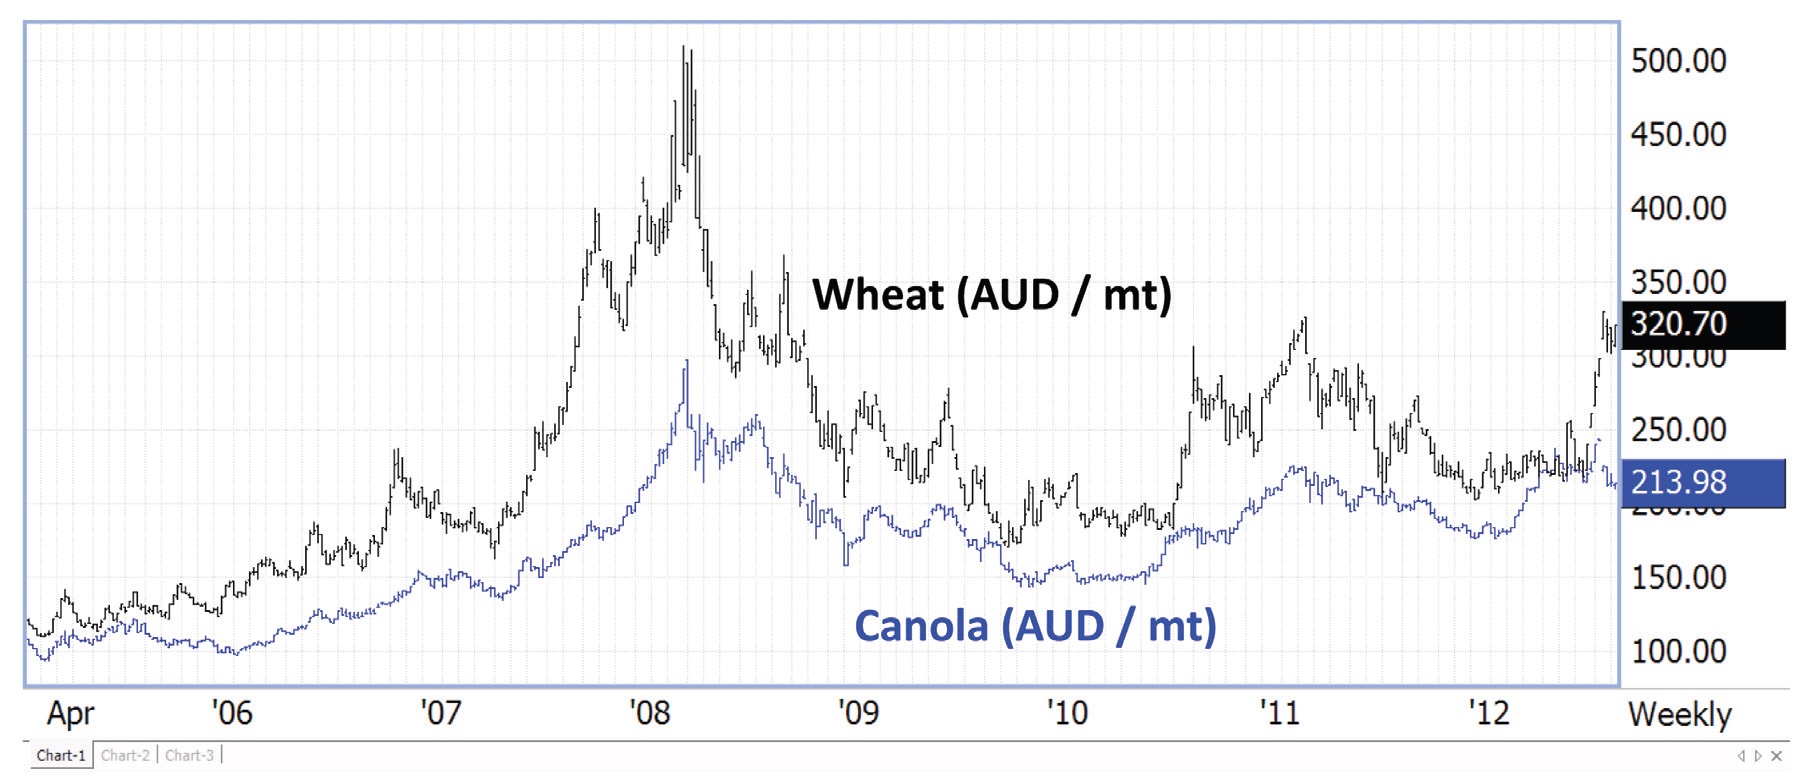 Figure 2. Recent canola and wheat price history (Data source: Future markets)